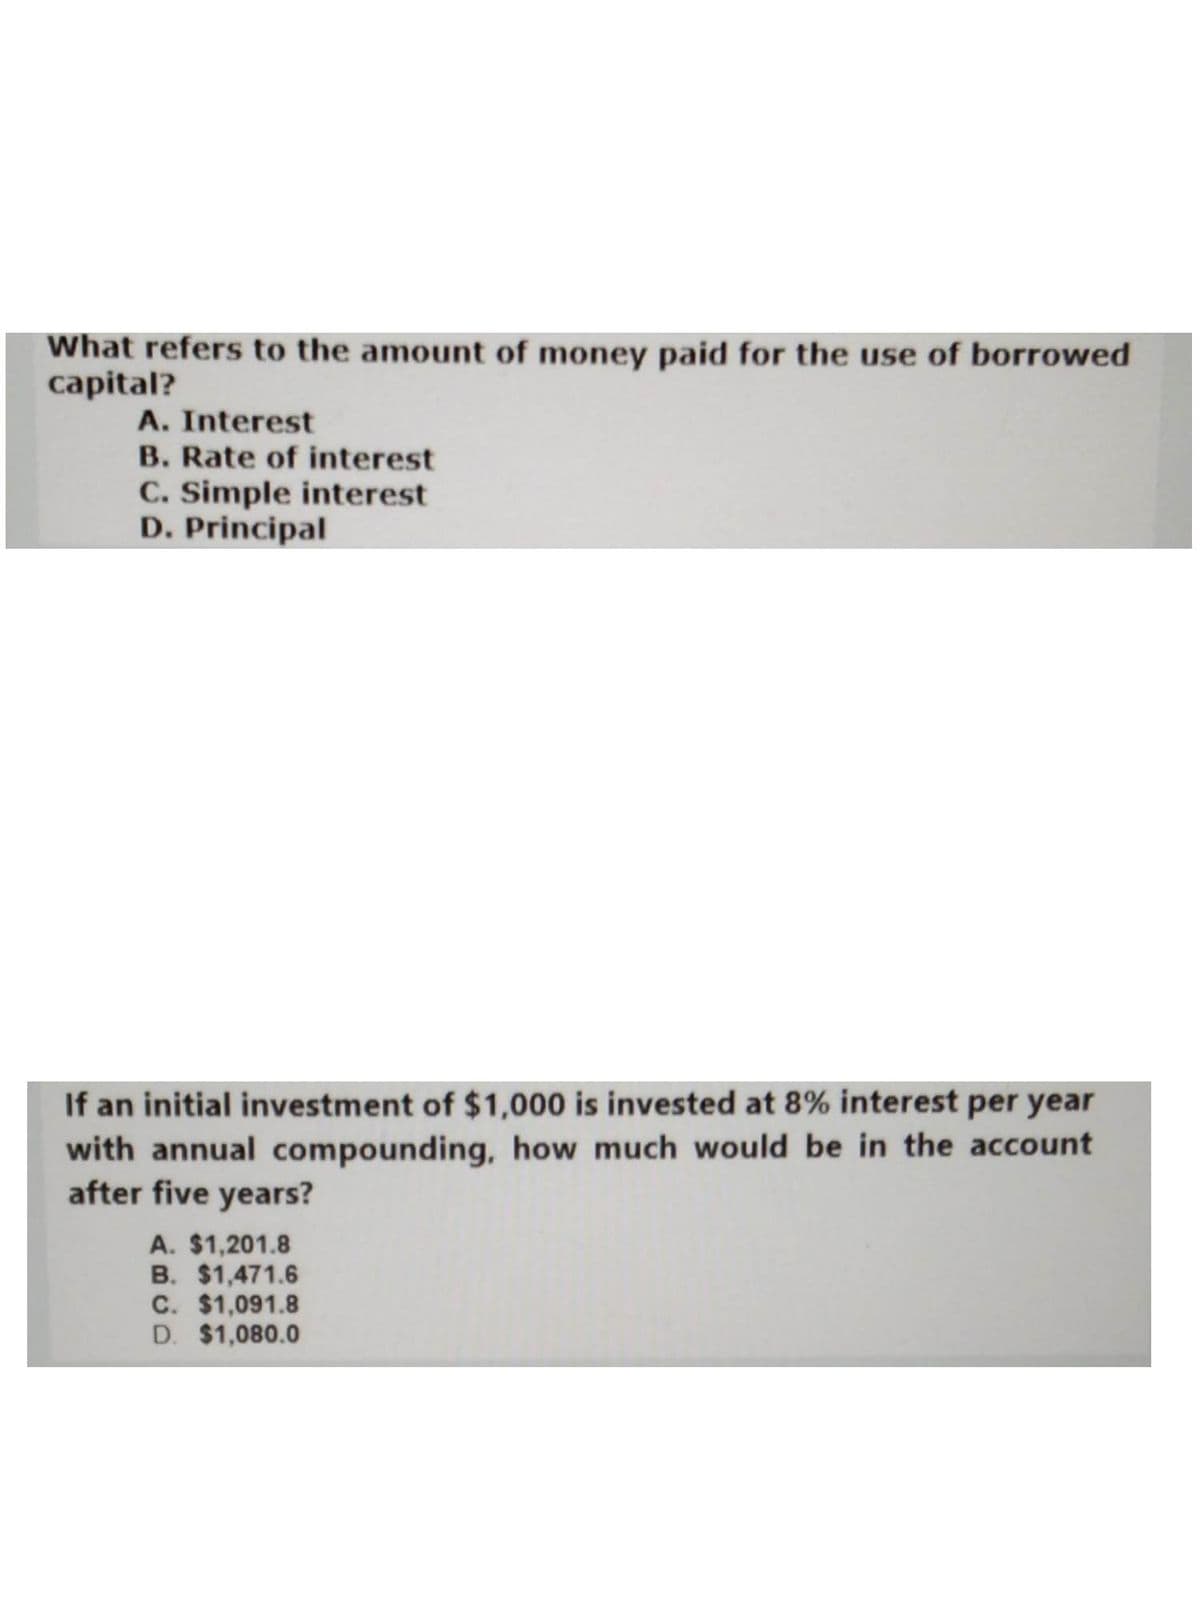 What refers to the amount of money paid for the use of borrowed
capital?
A. Interest
B. Rate of interest
C. Simple interest
D. Principal
If an initial investment of $1,000 is invested at 8% interest per year
with annual compounding, how much would be in the account
after five years?
A. $1,201.8
B. $1,471.6
C. $1,091.8
D. $1,080.0